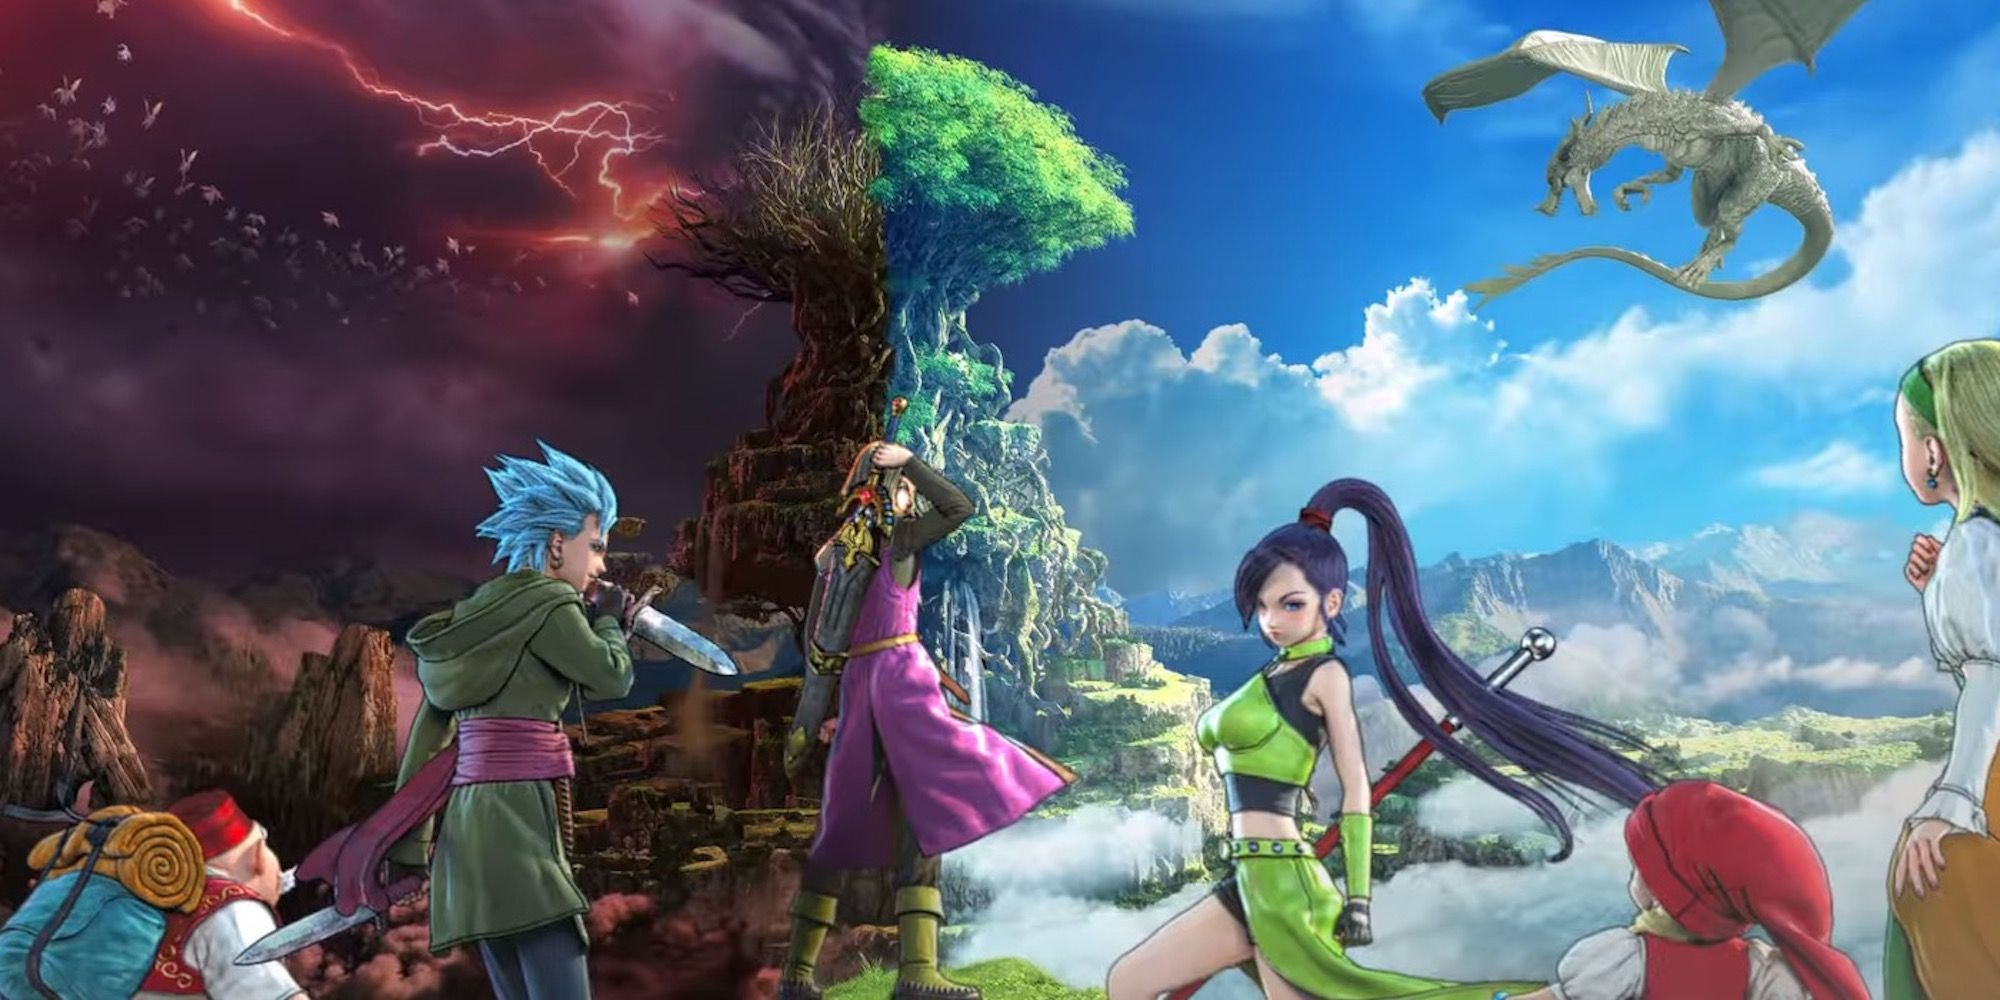 Promo art featuring characters from Dragon Quest XI